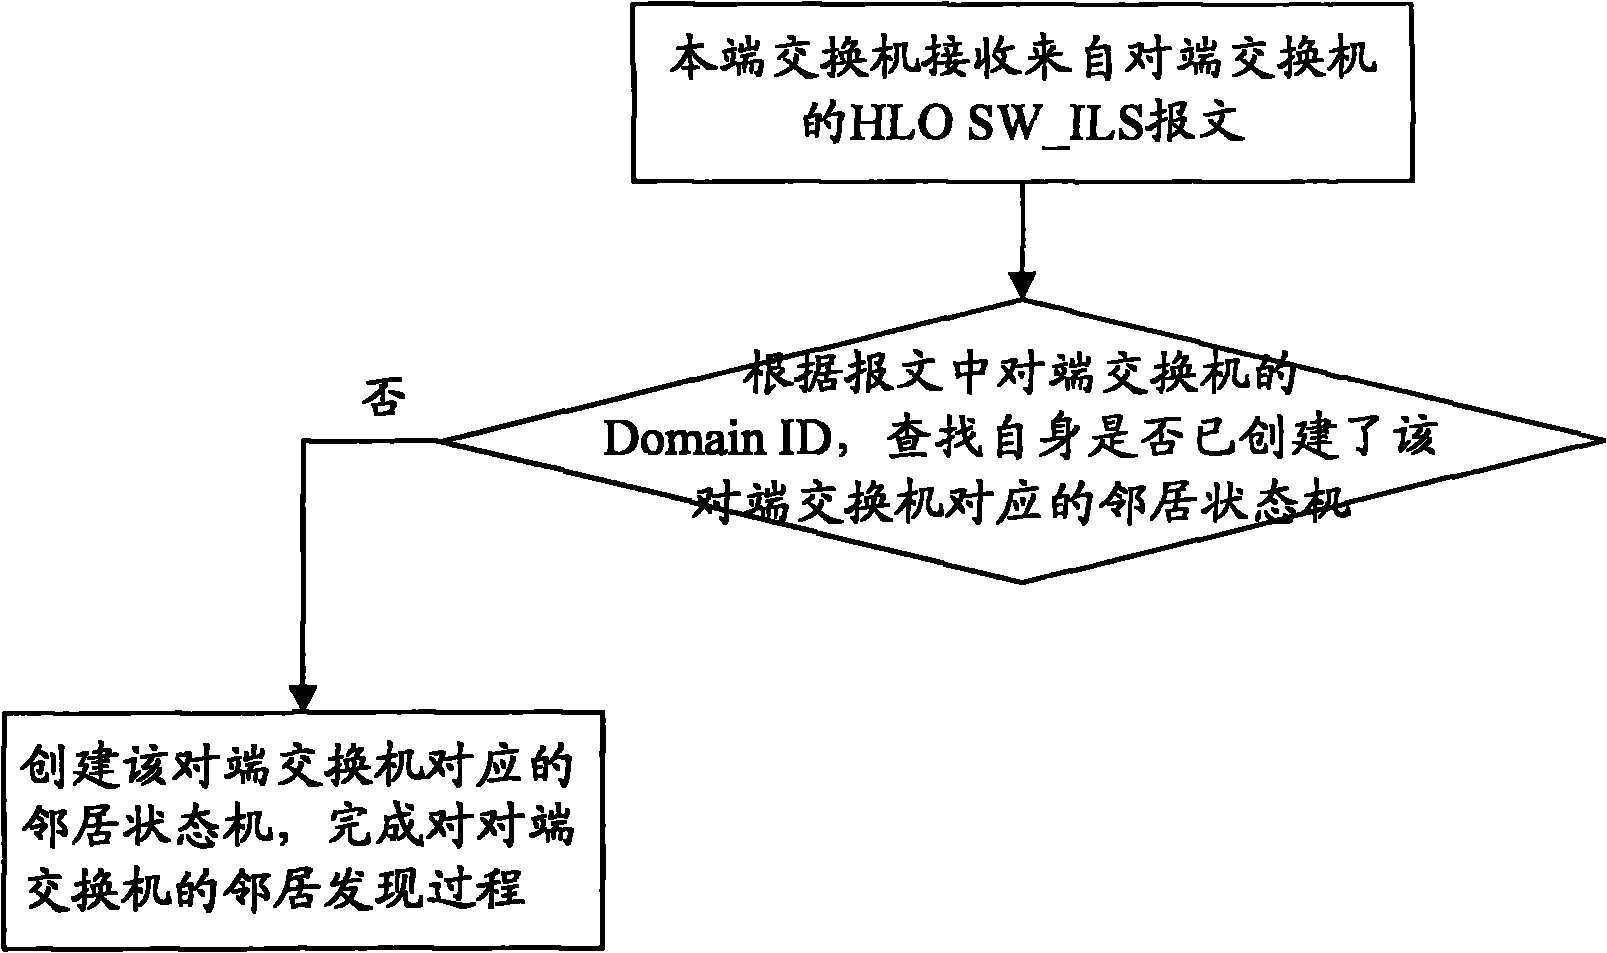 Method applied to FCoE (Fiber Channel over Ethernet) networking and used for optimizing FSPE (Fiber Shortest Path First) protocol and switchboards